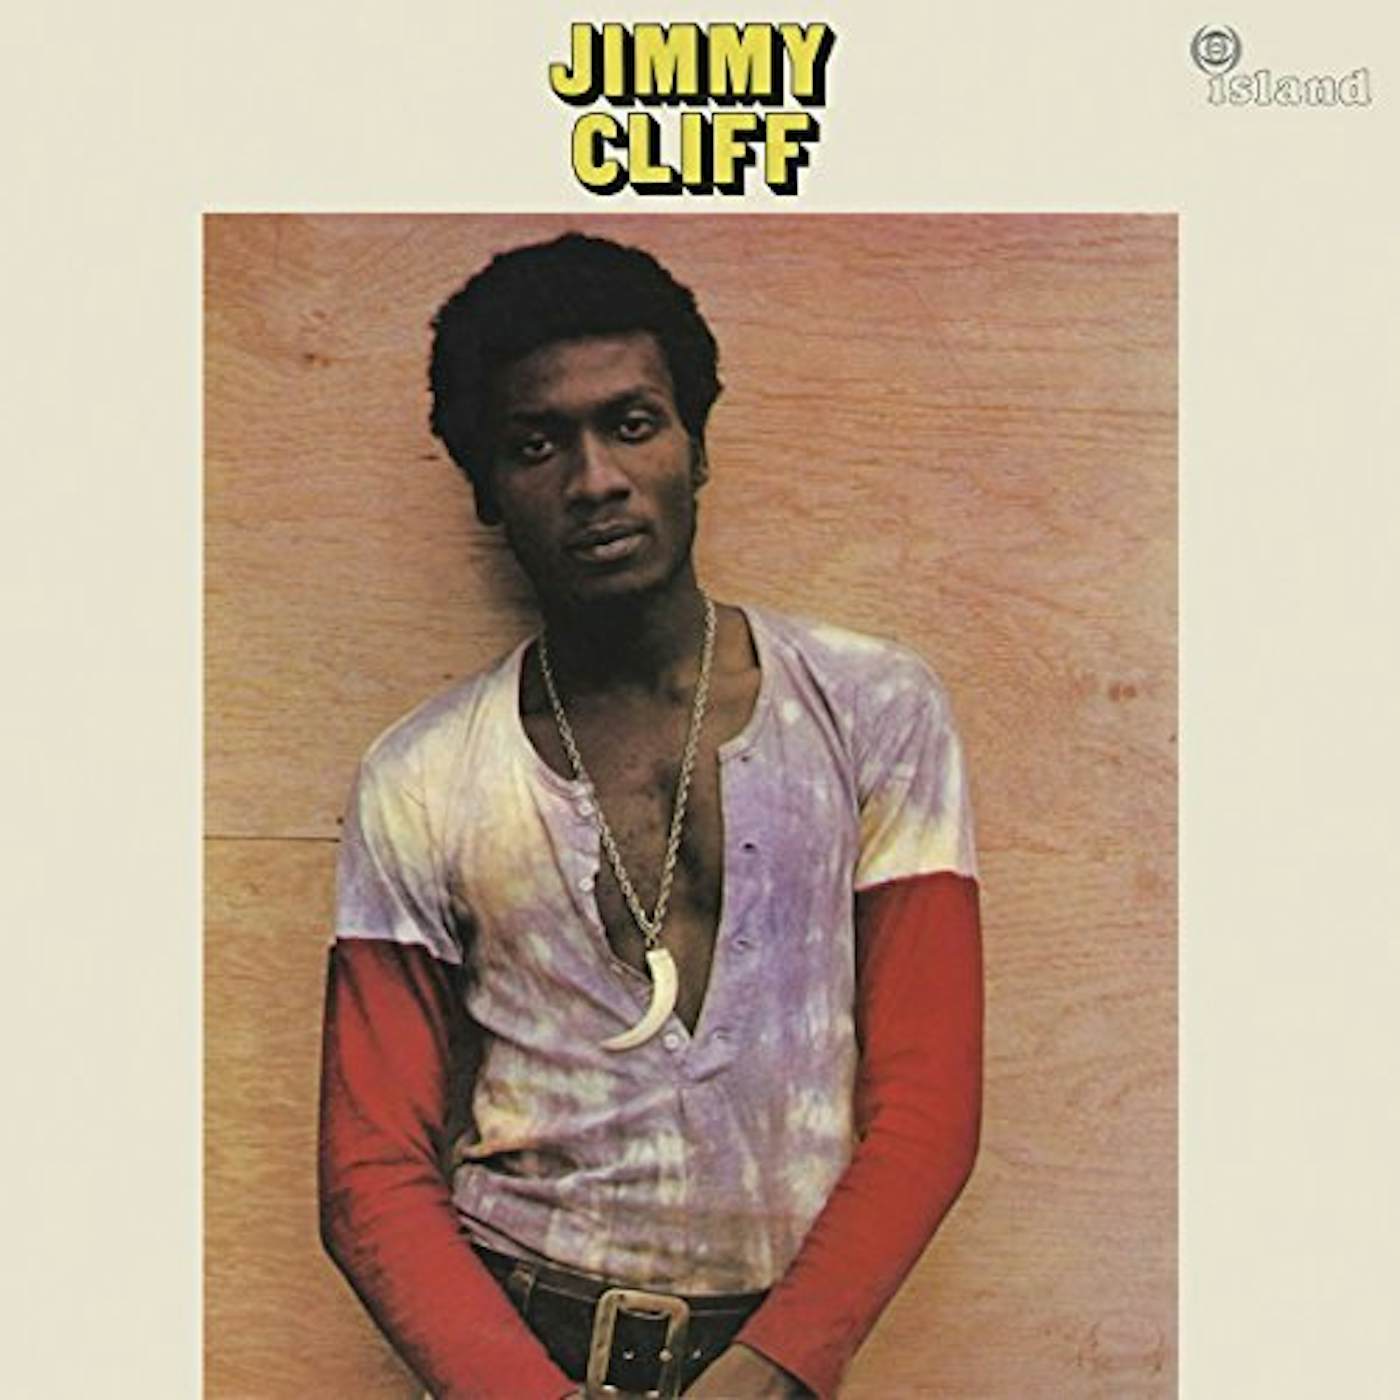 JIMMY CLIFF (EXPANDED EDITION) Vinyl Record